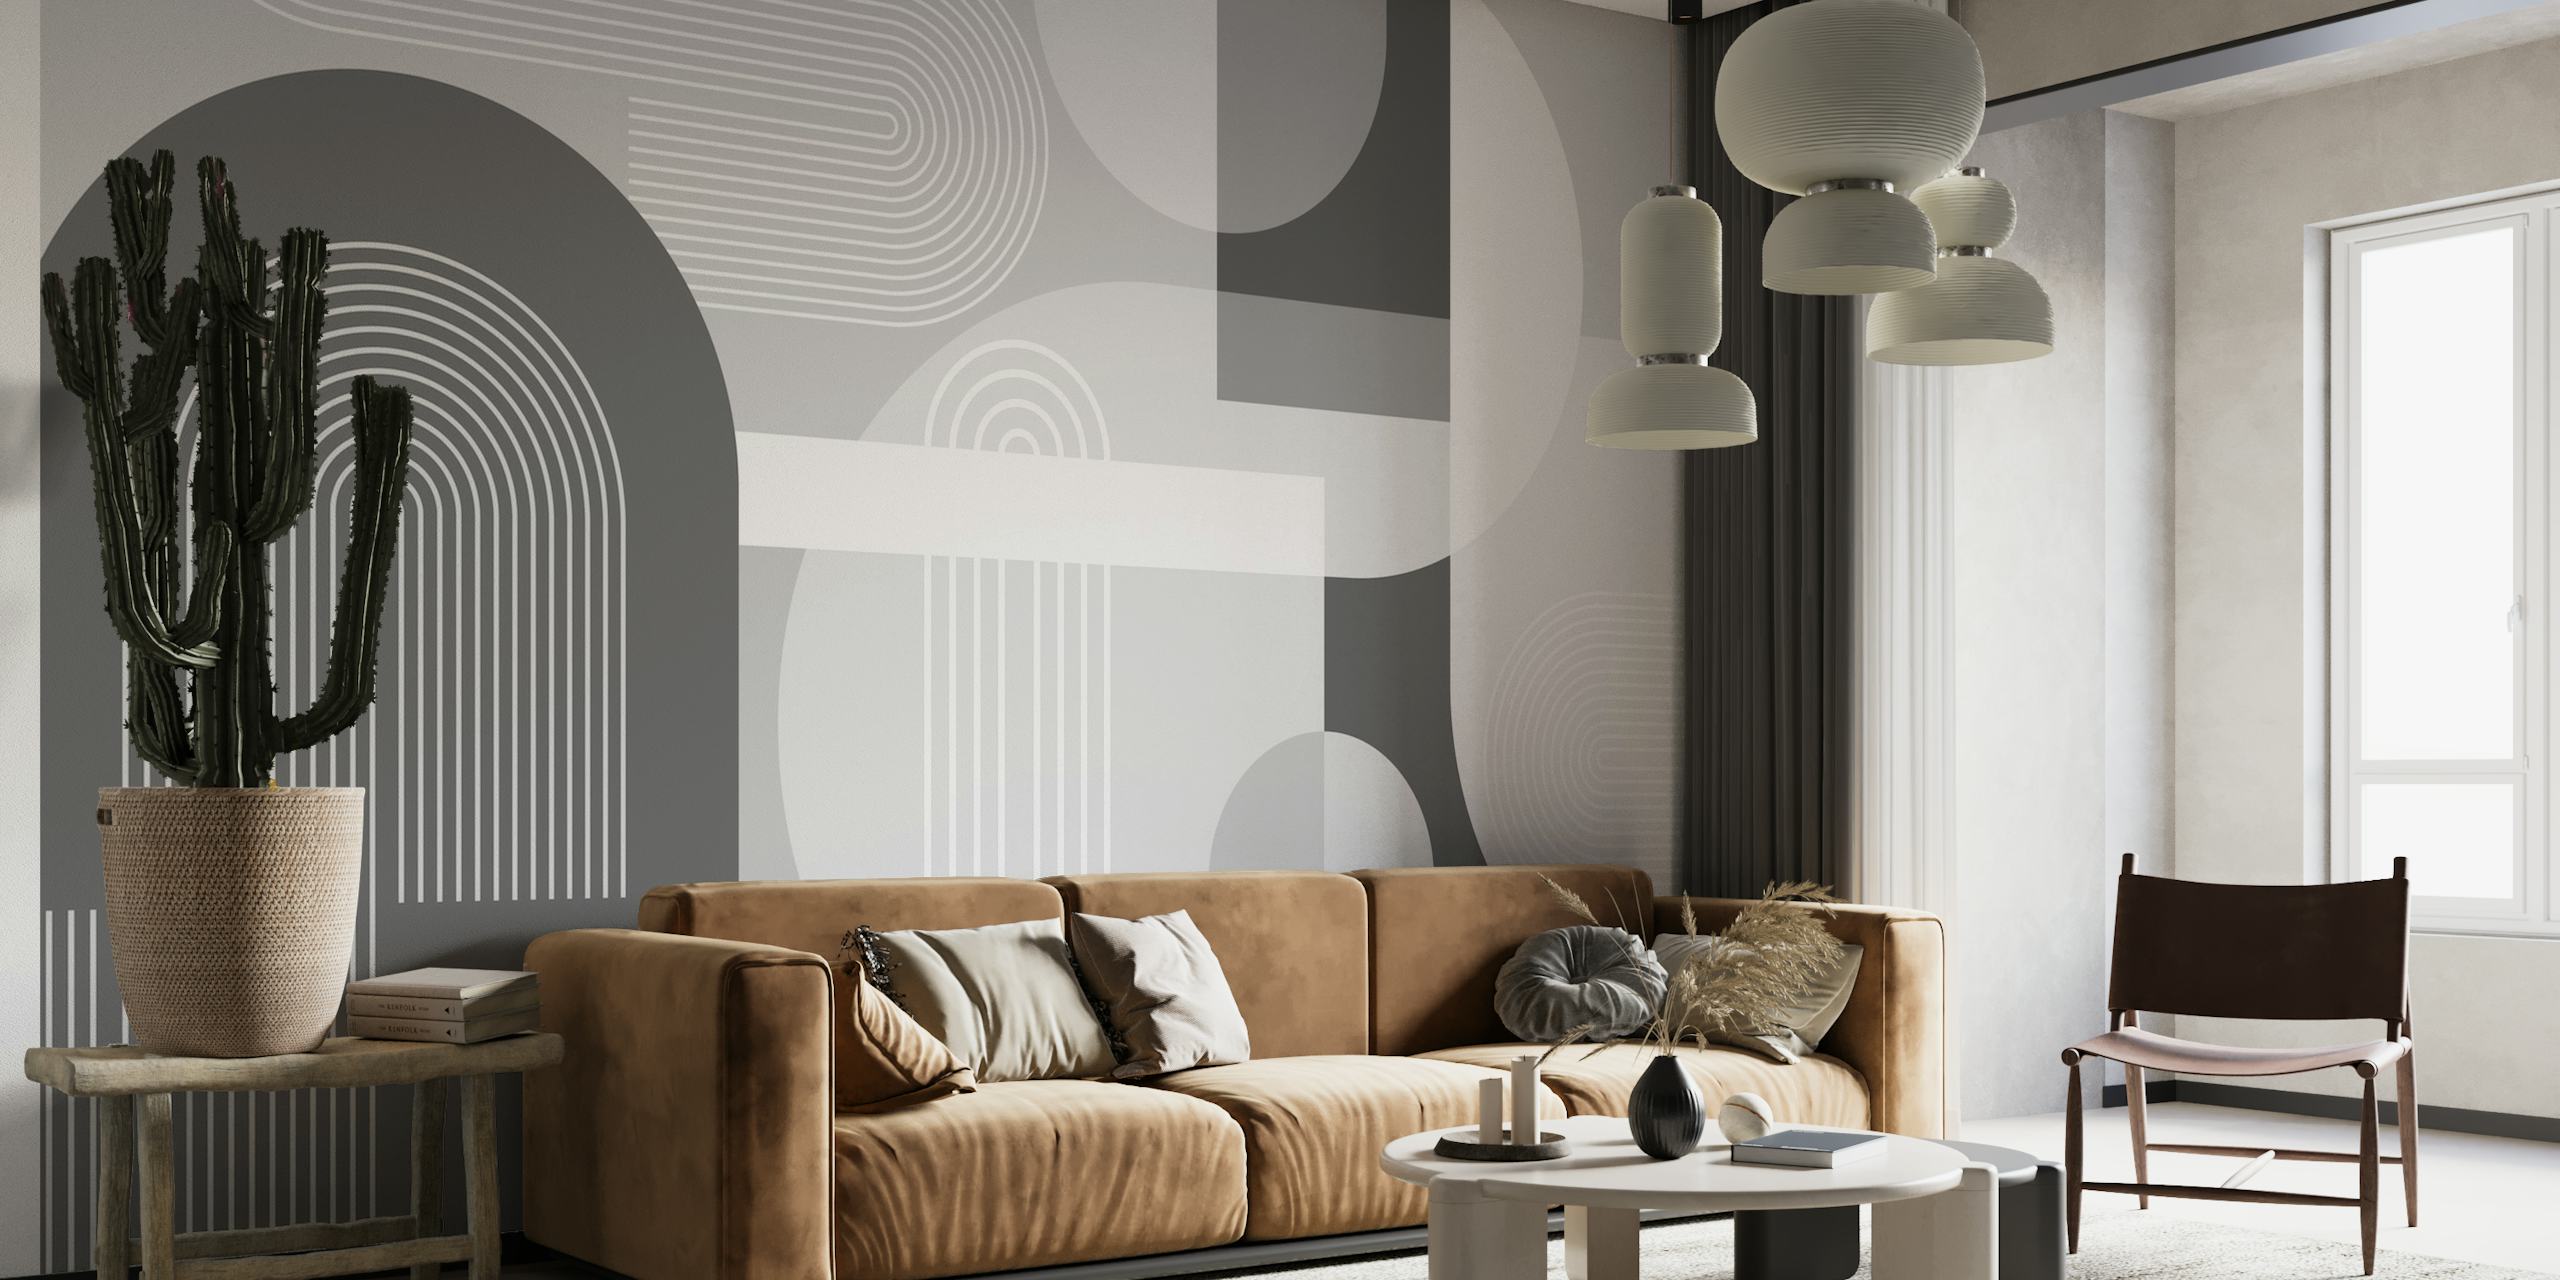 Monochromatic abstract wall mural with grey arches and geometric patterns